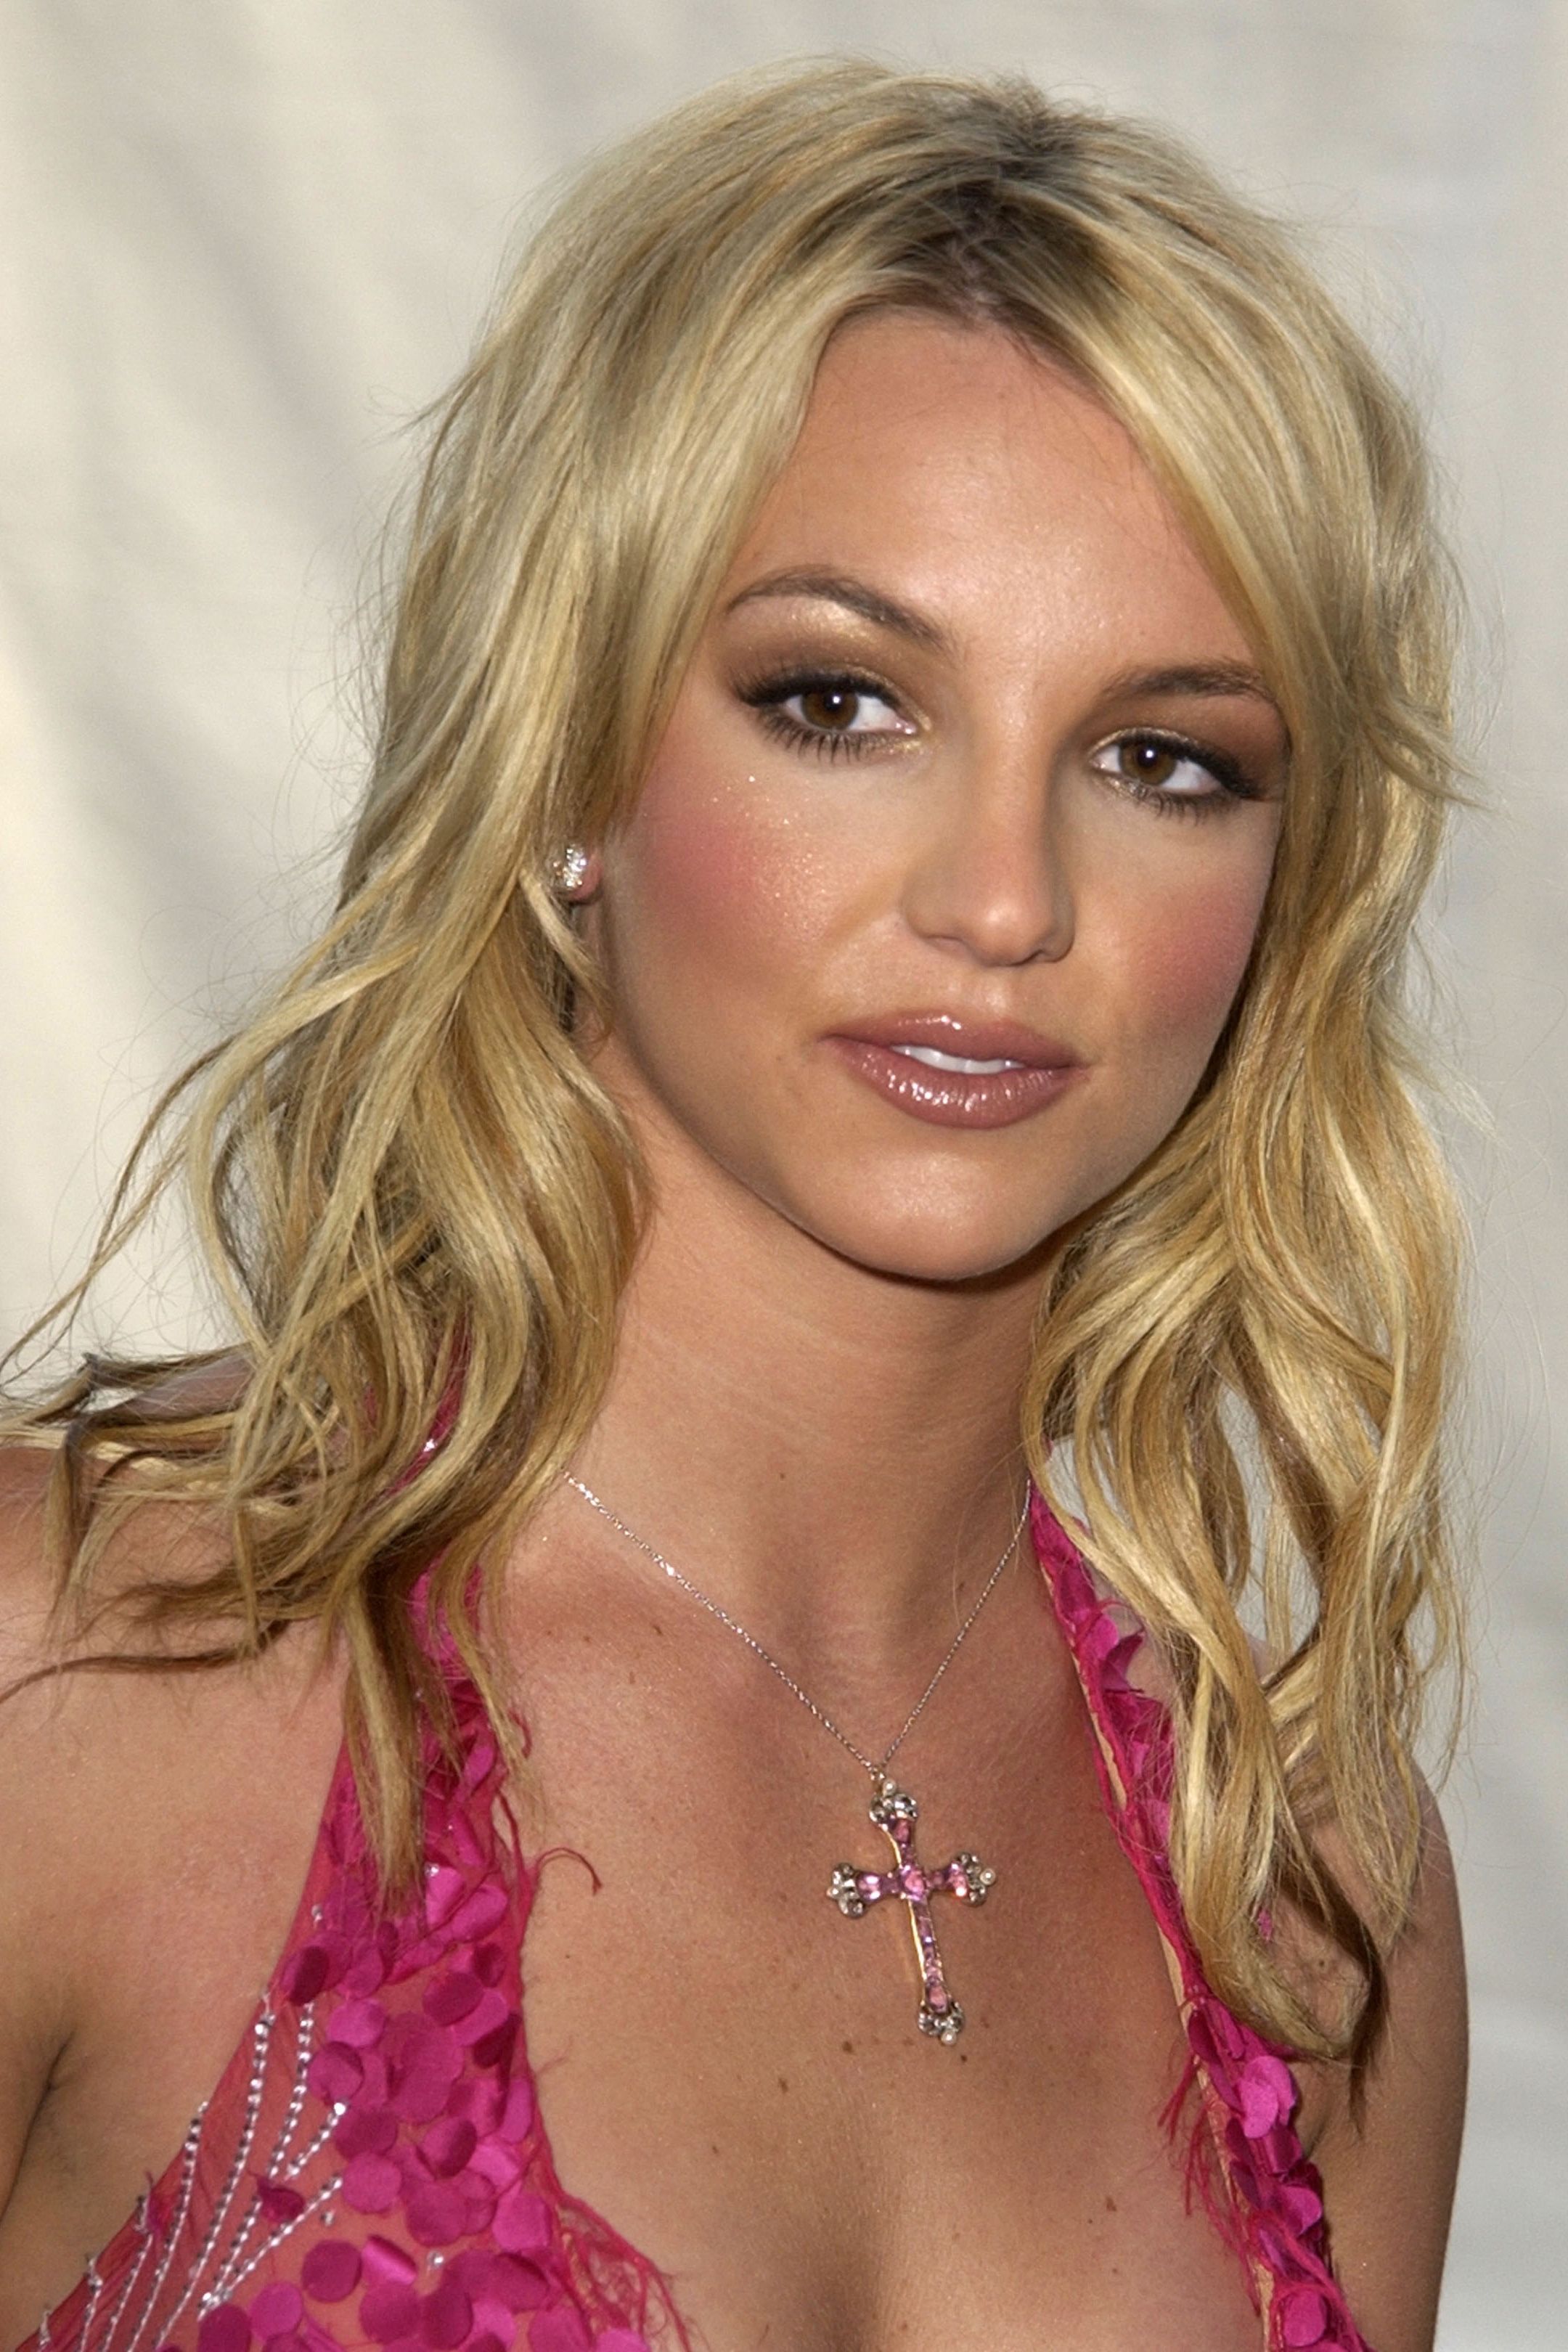 dewy-makeup-vs-matte-makeup-which-ideal-makeup-suits-britney-spears.jpg